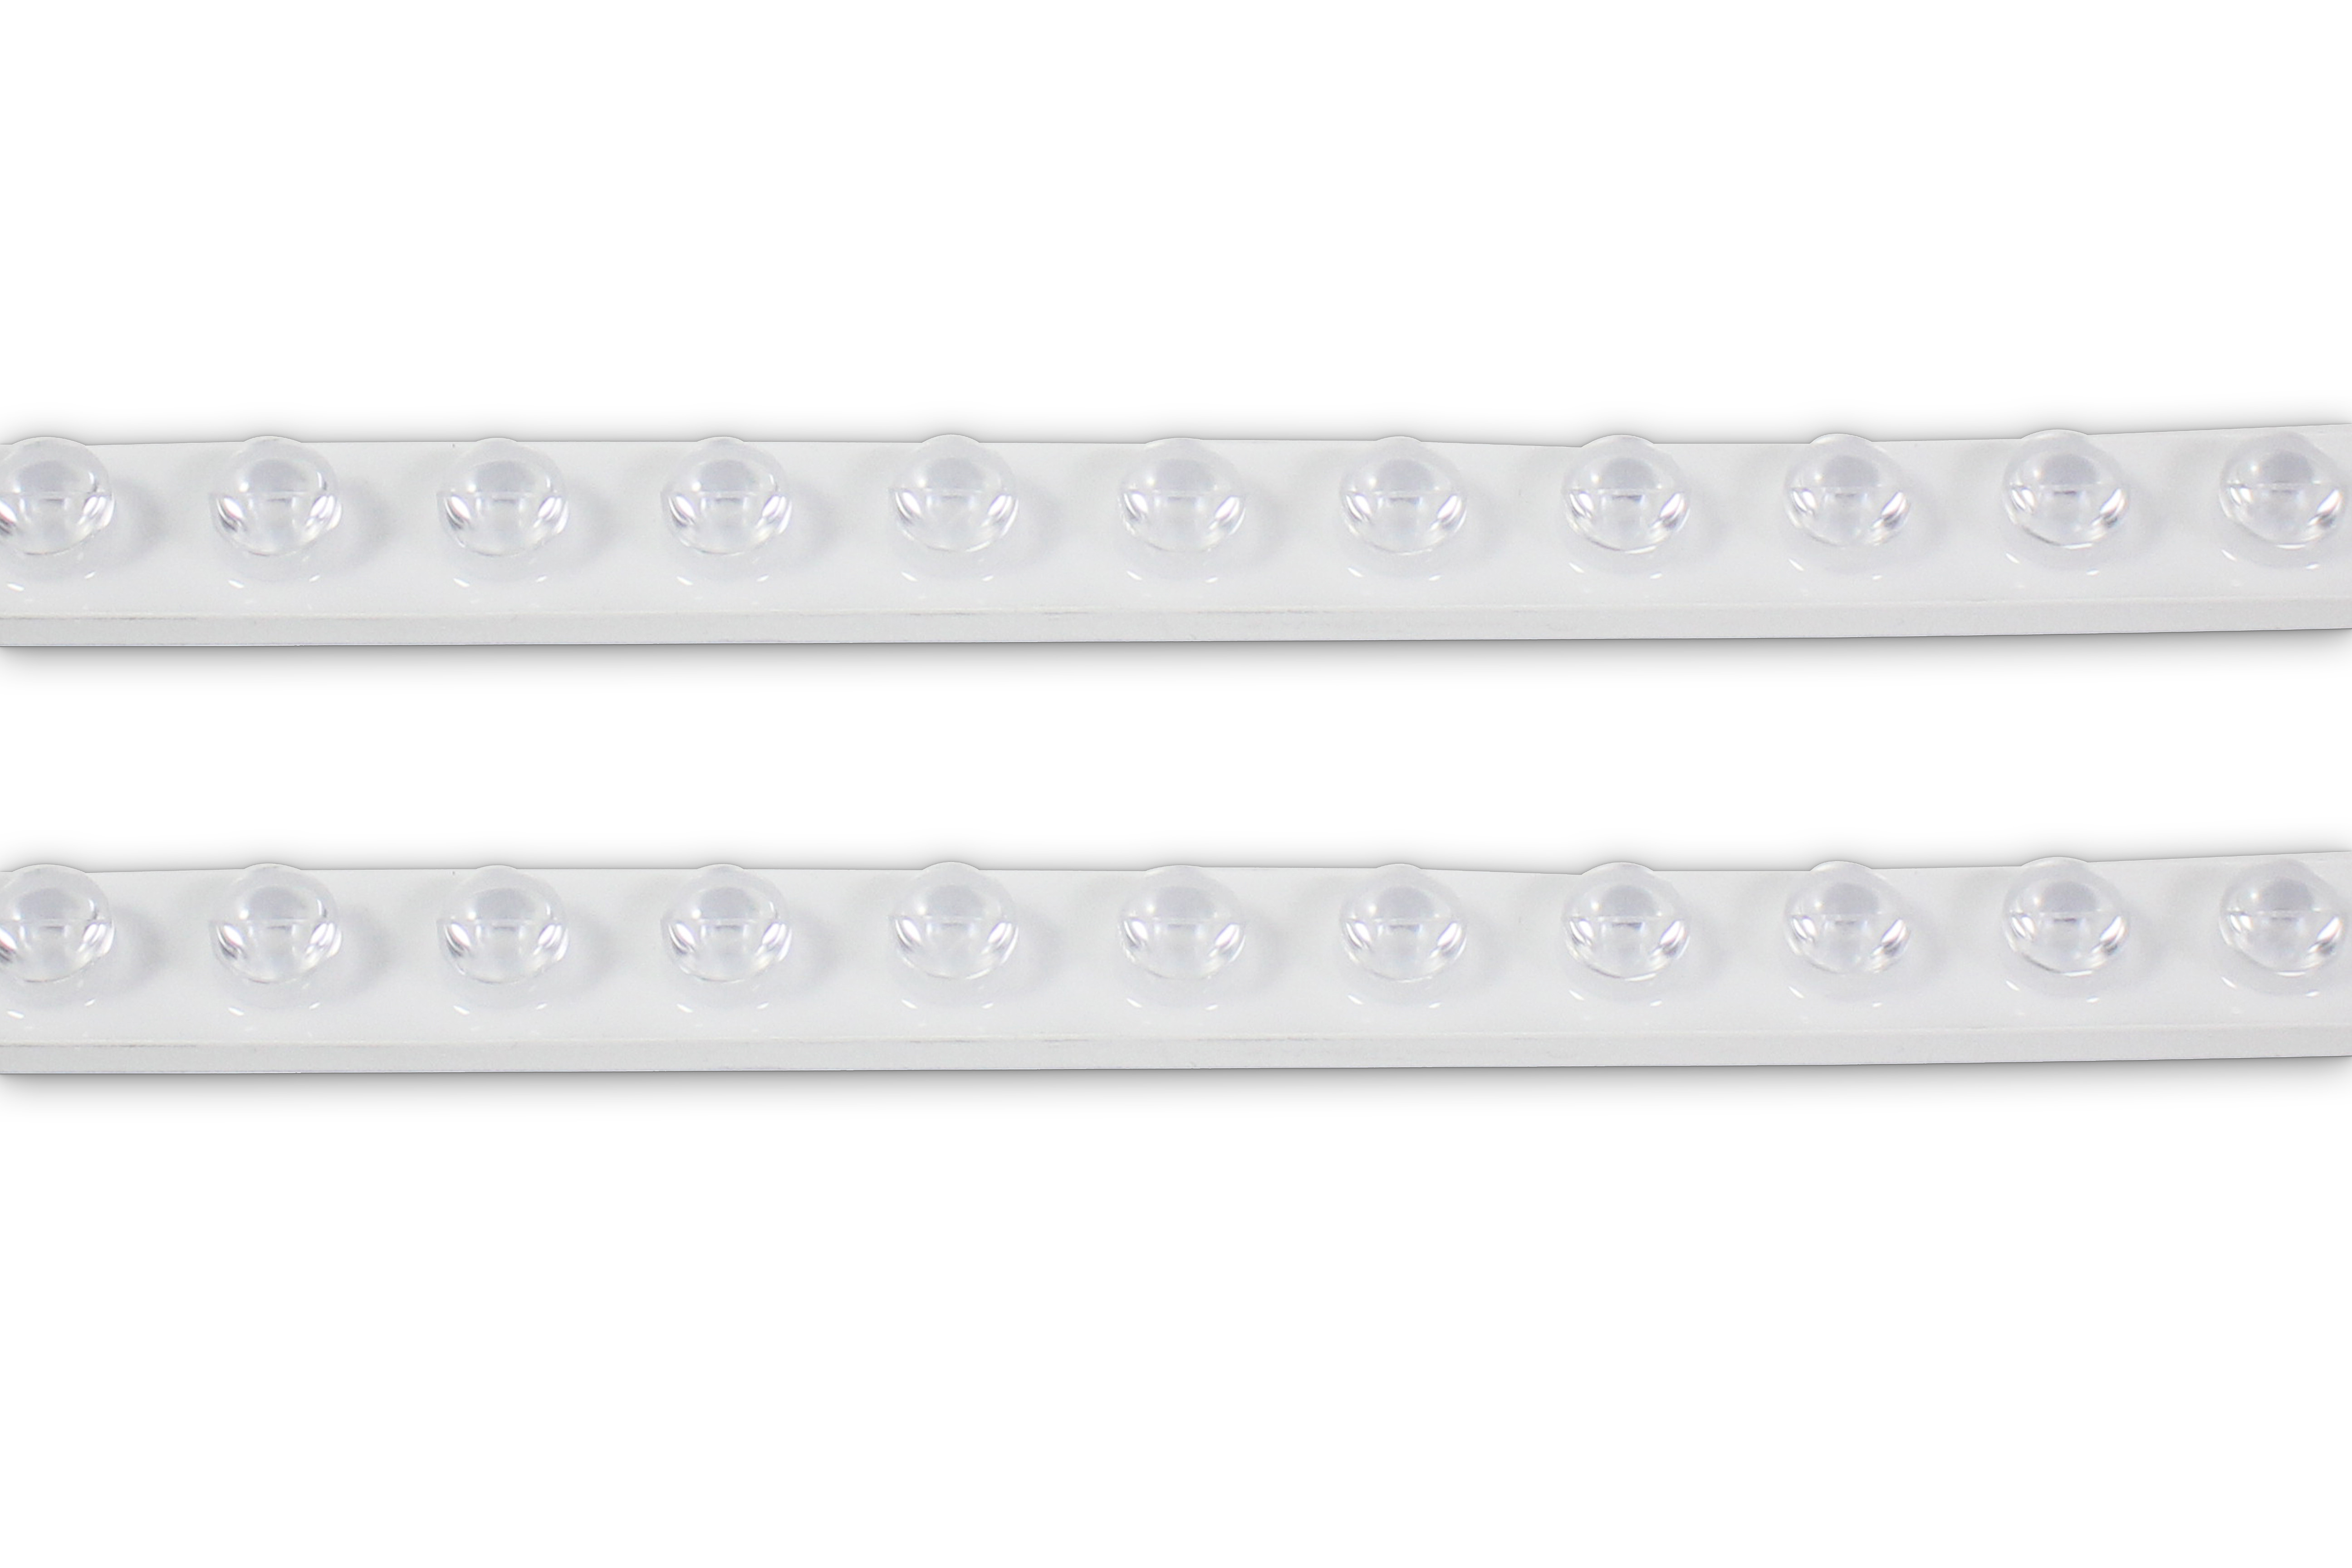 IP67 SMD2835 42pcs Flex Wall Washer Led Strip Light With Lens